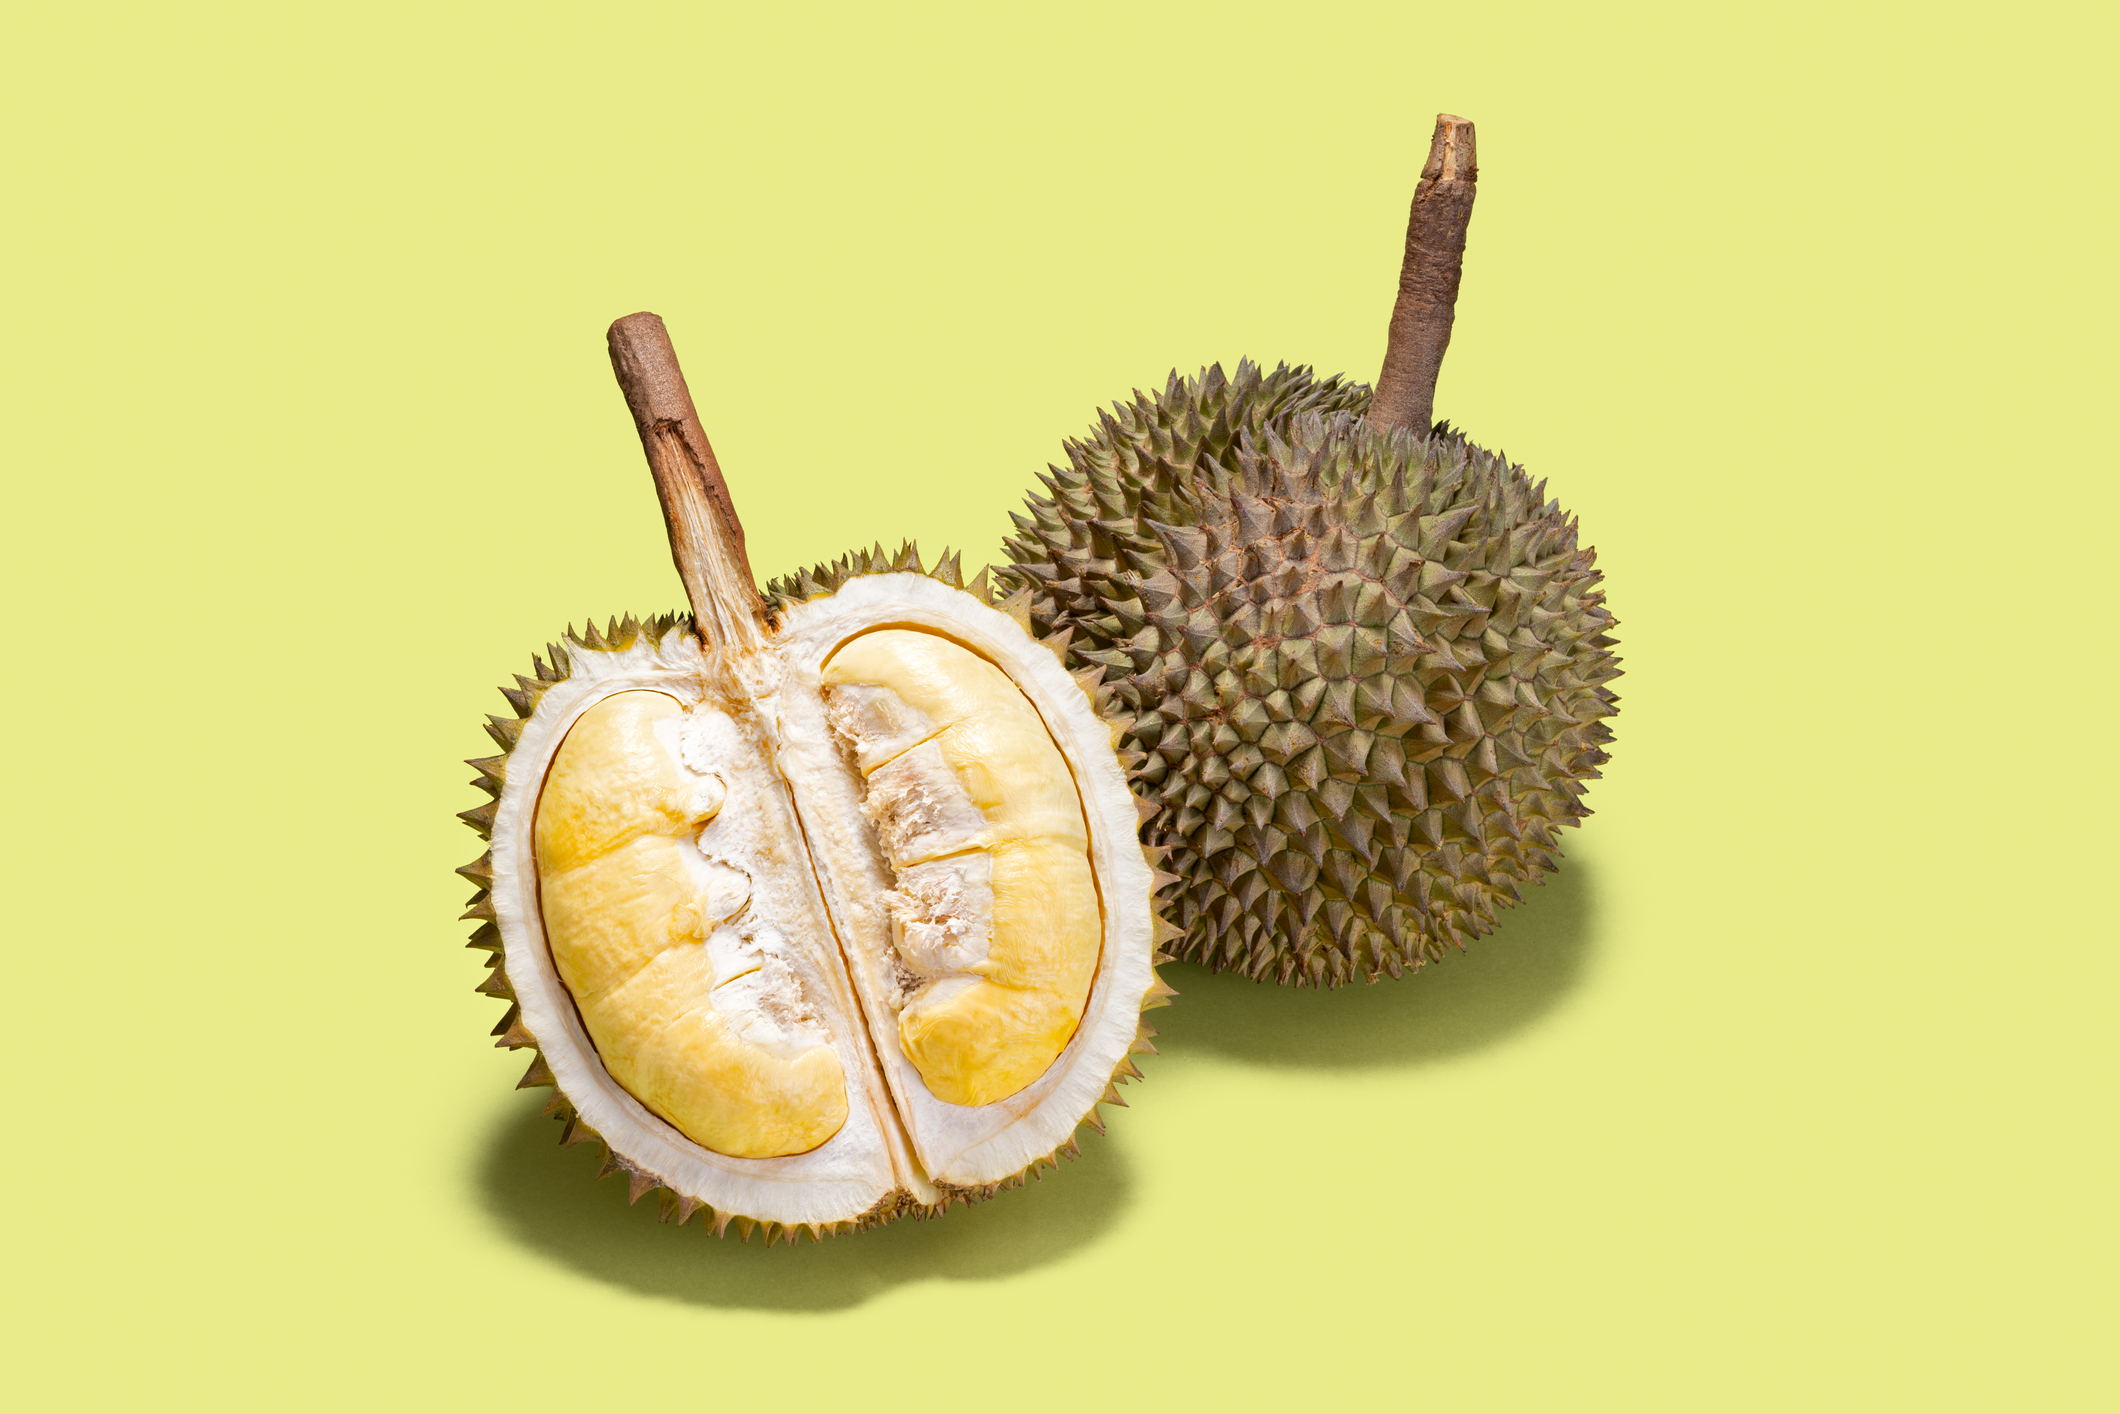 8. Durian